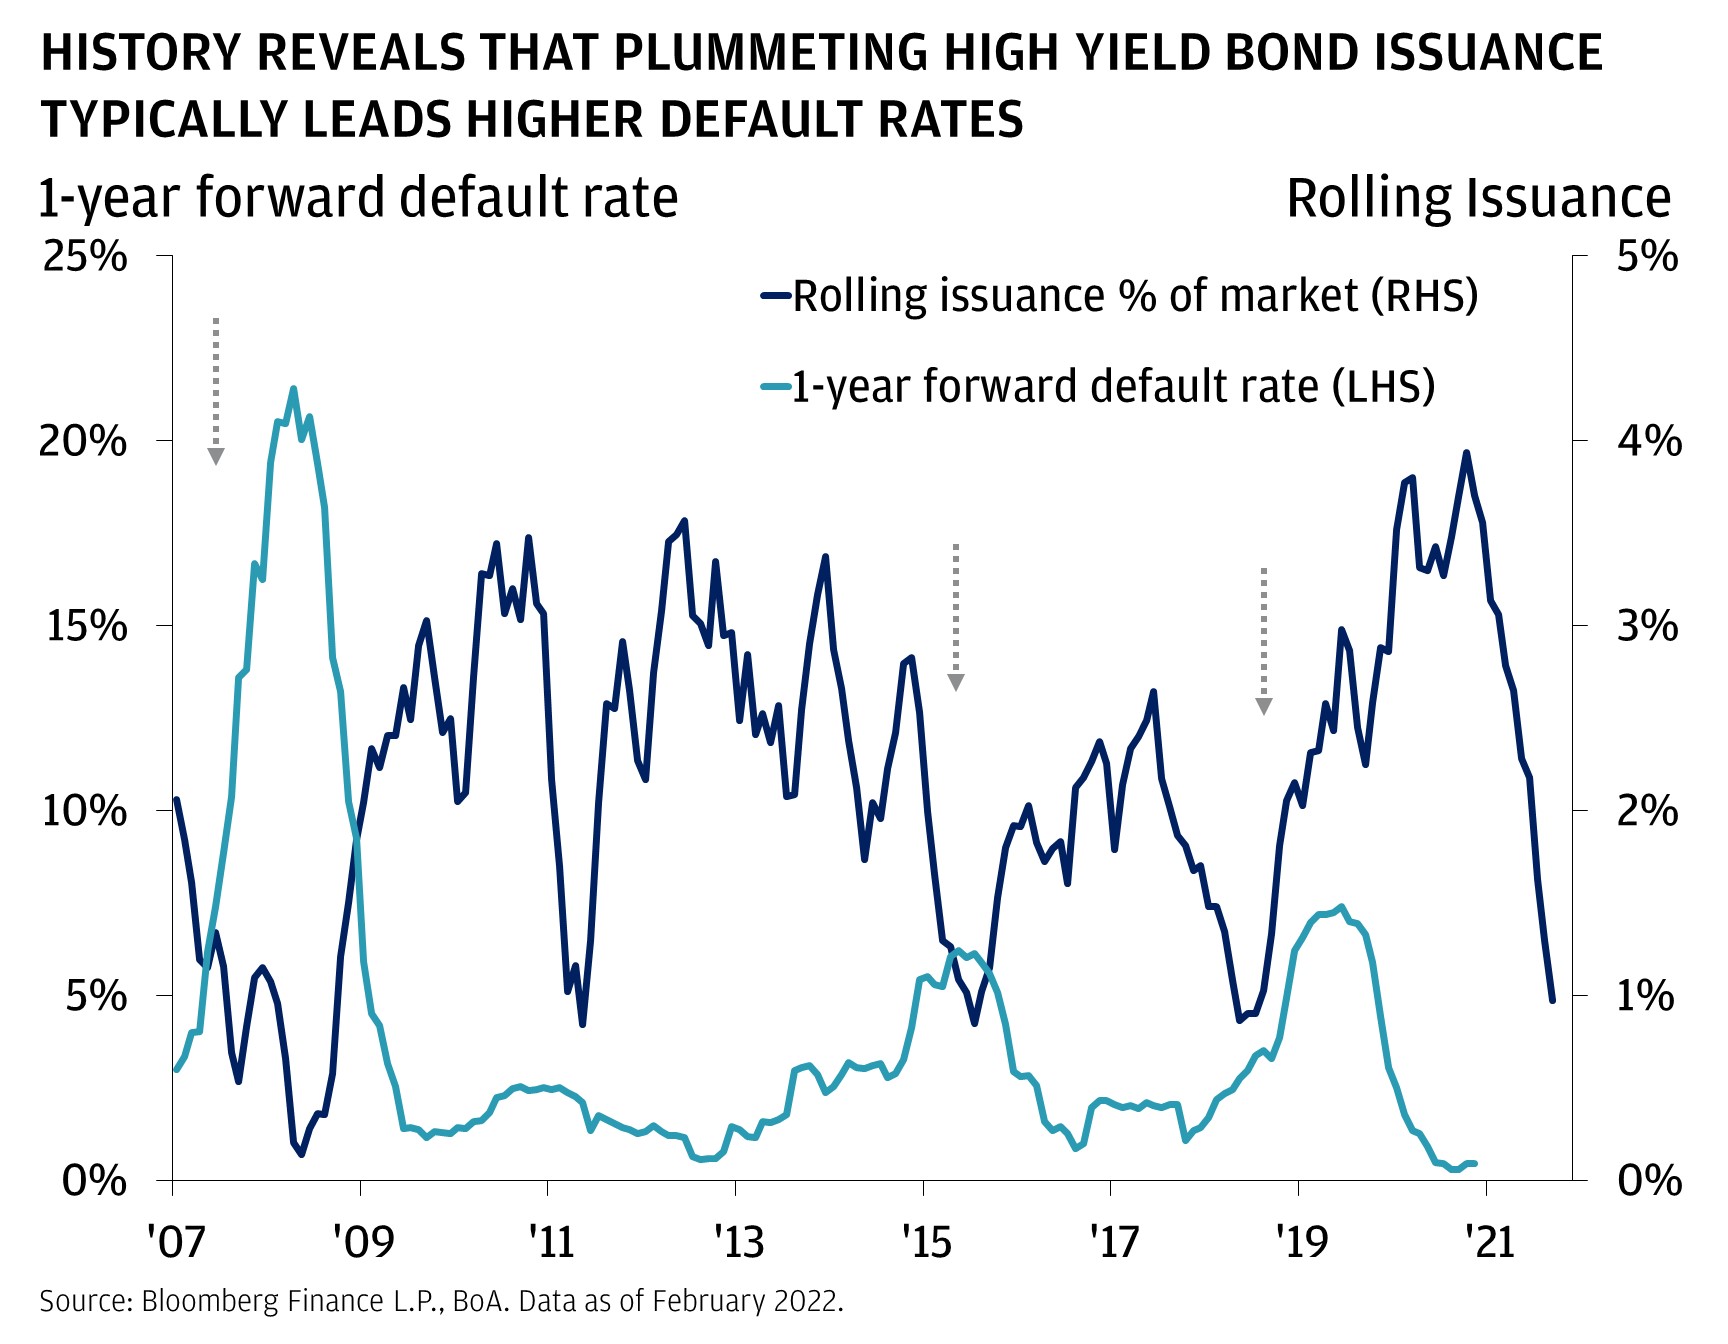 This chart shows one-year forward high yield default rates and rolling issuance as a percentage of the market from 2007 to 2022.